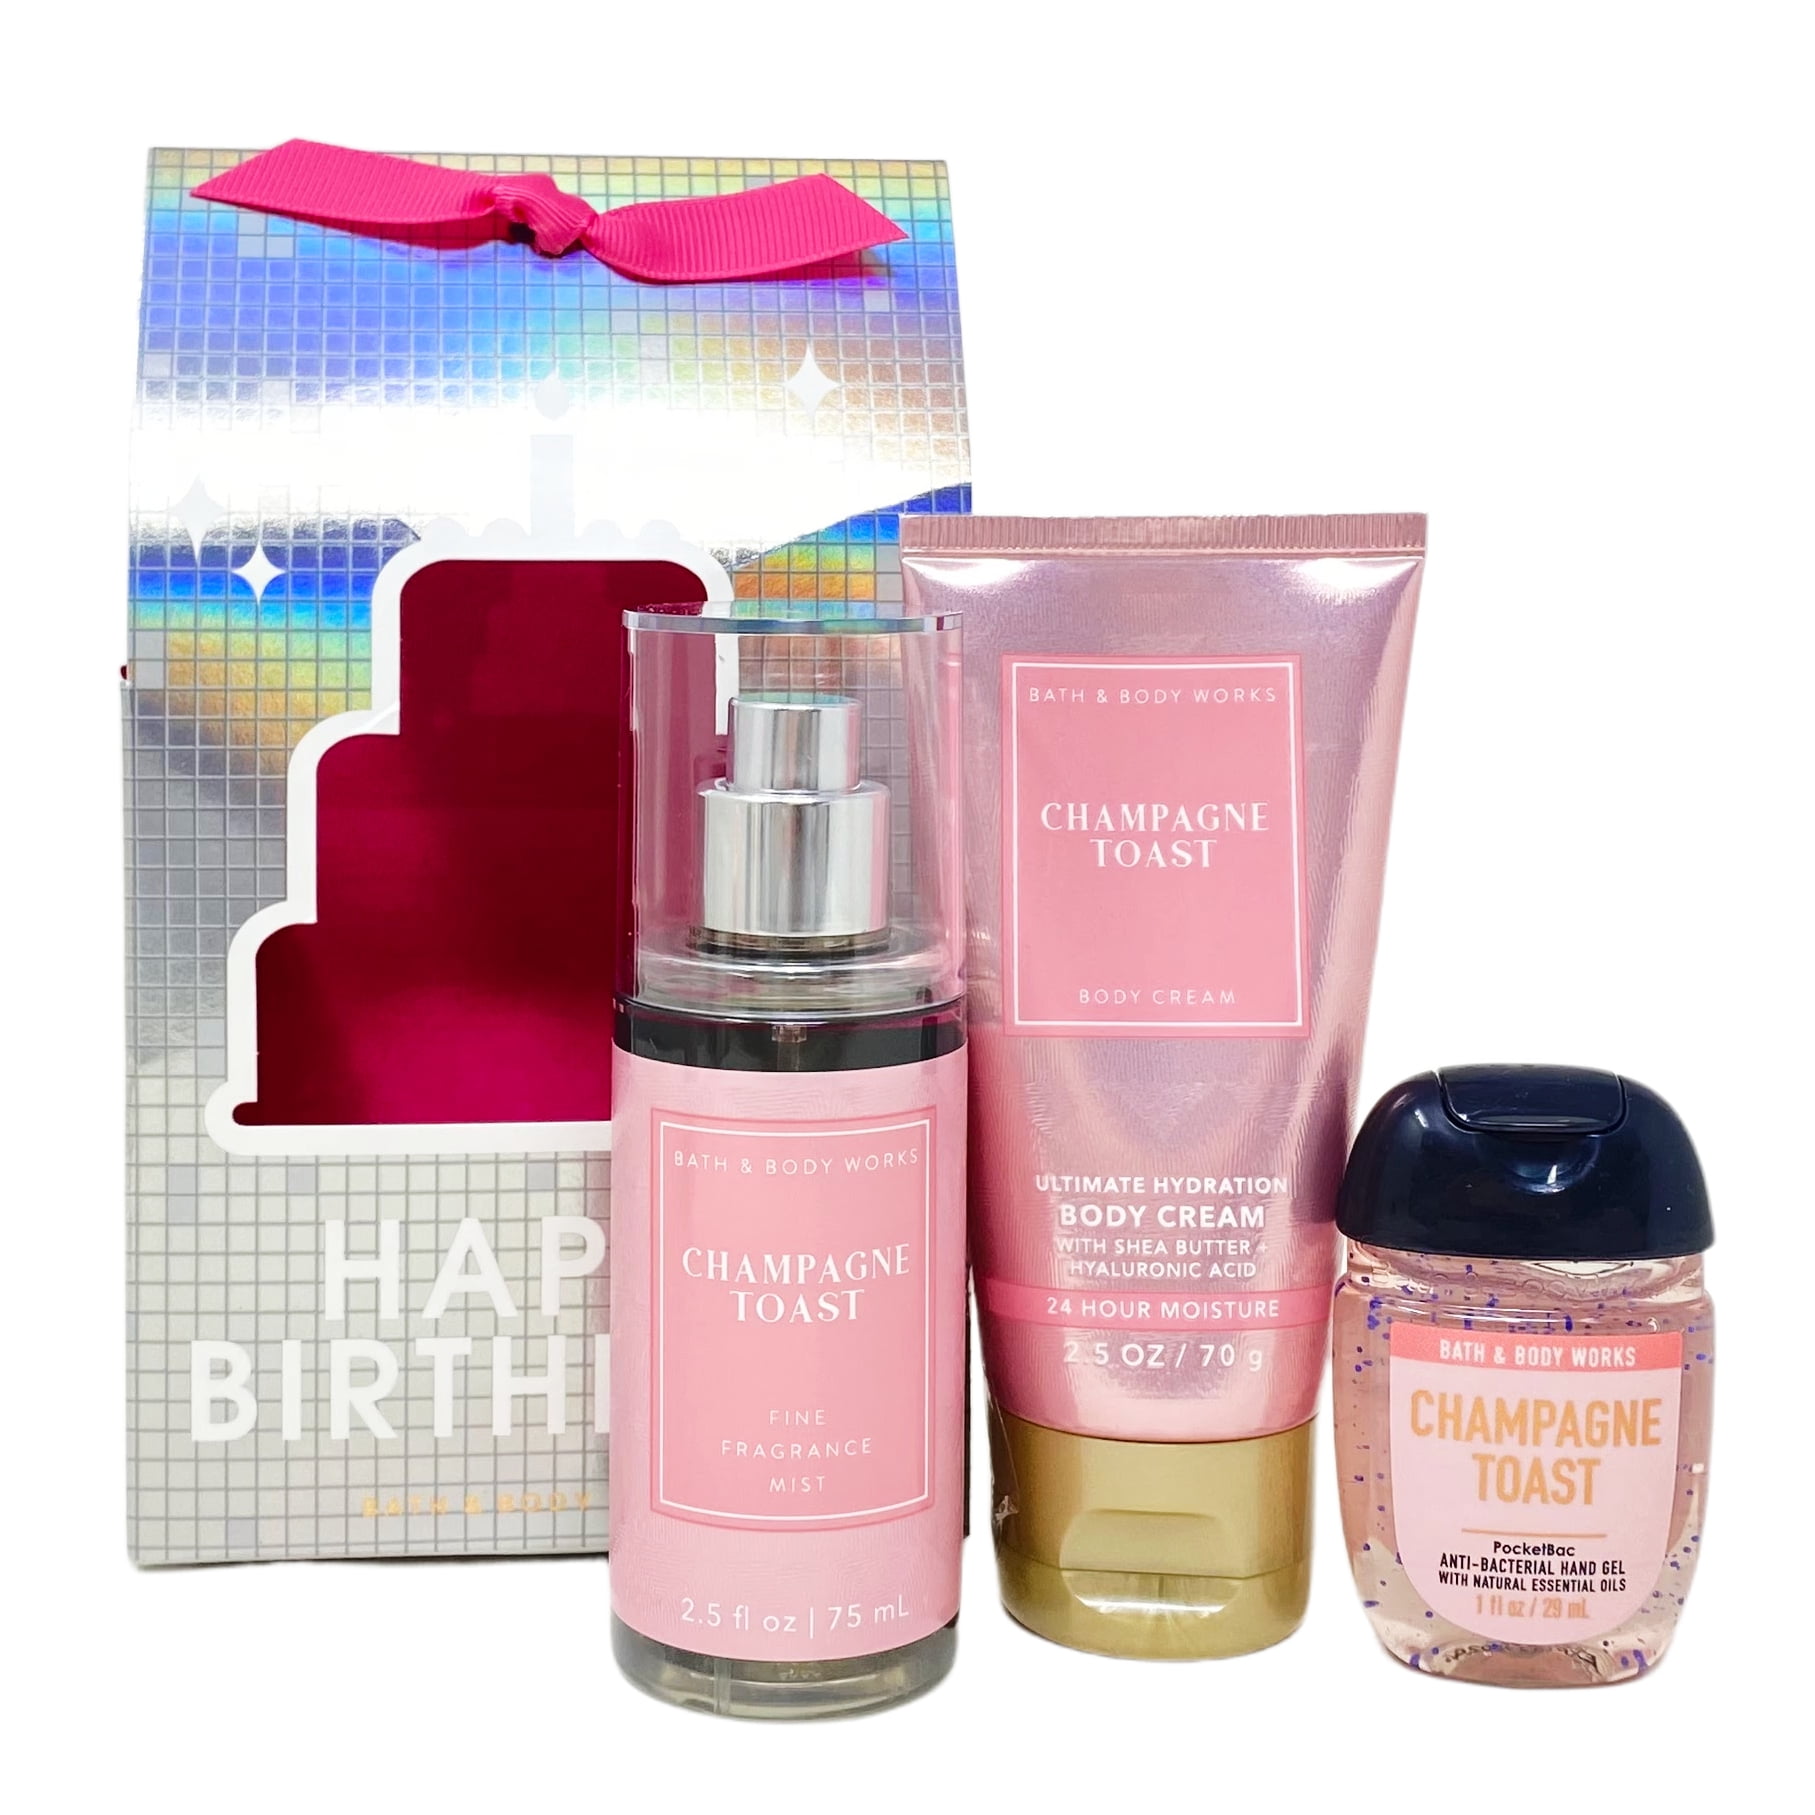 Bath & Body Works, Bath & Body, Bath Body Works Champagne Toast Shower  Gel And Body Lotion